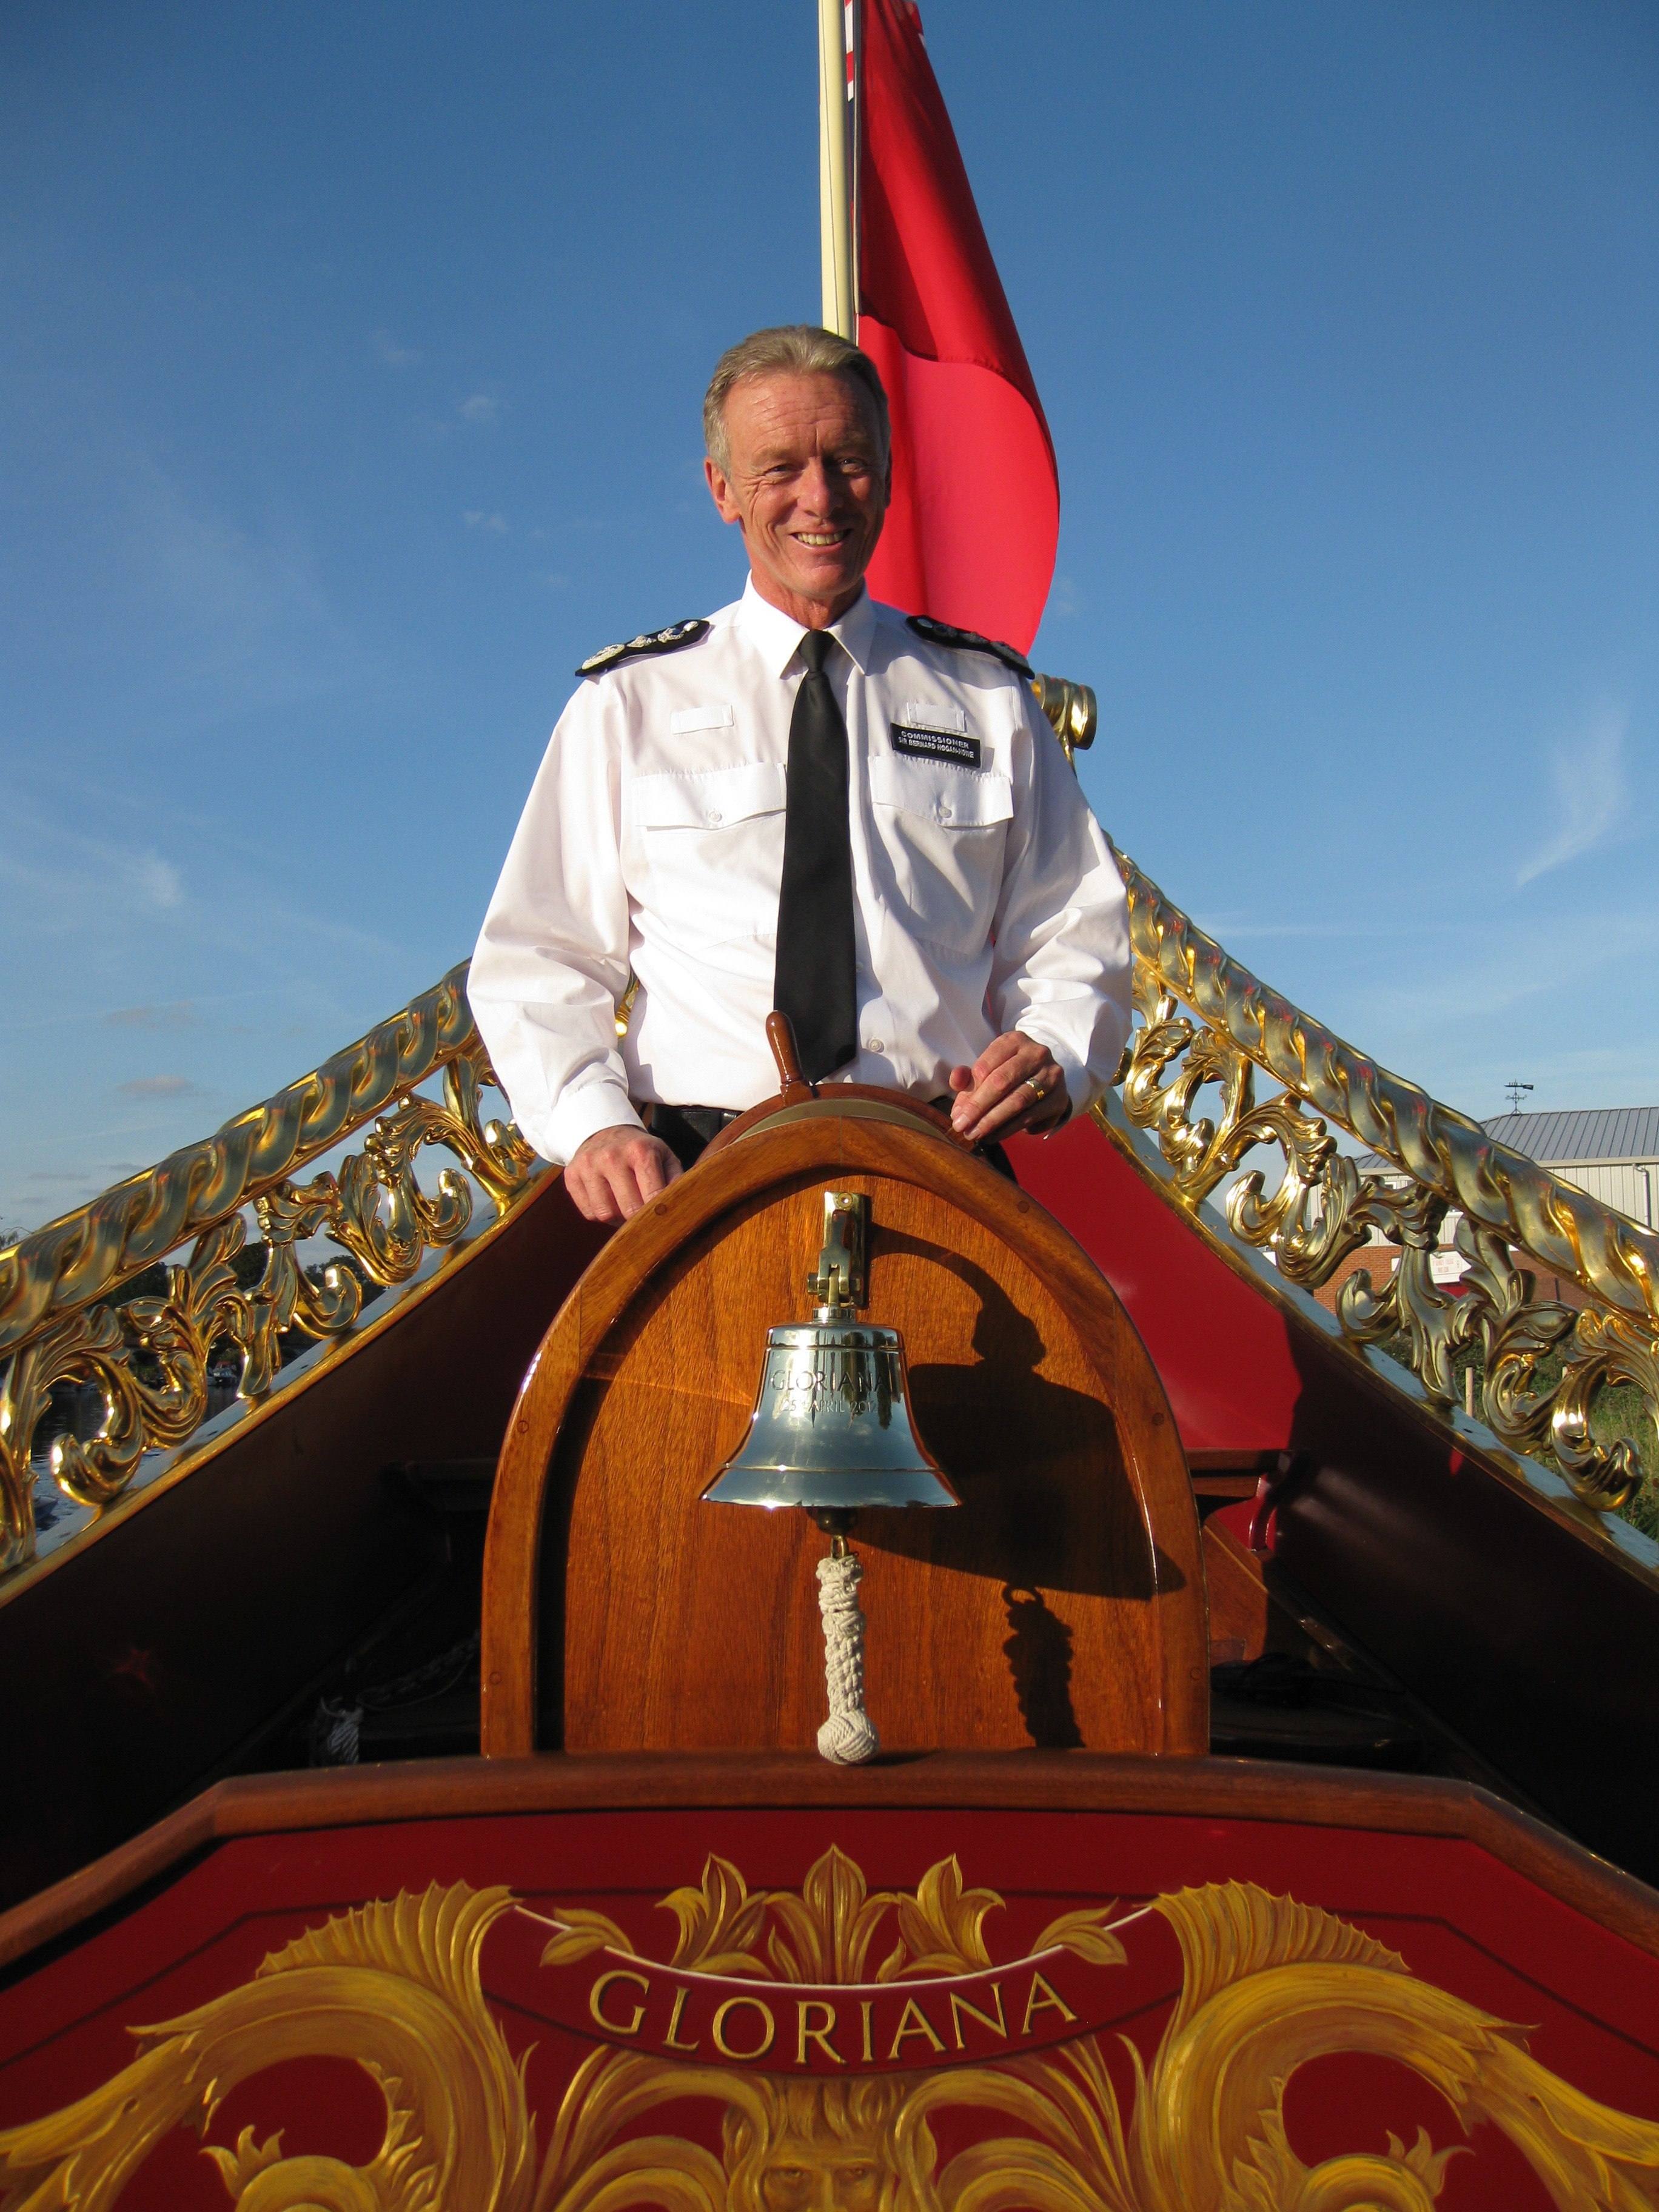 The Met Commissioner at the helm